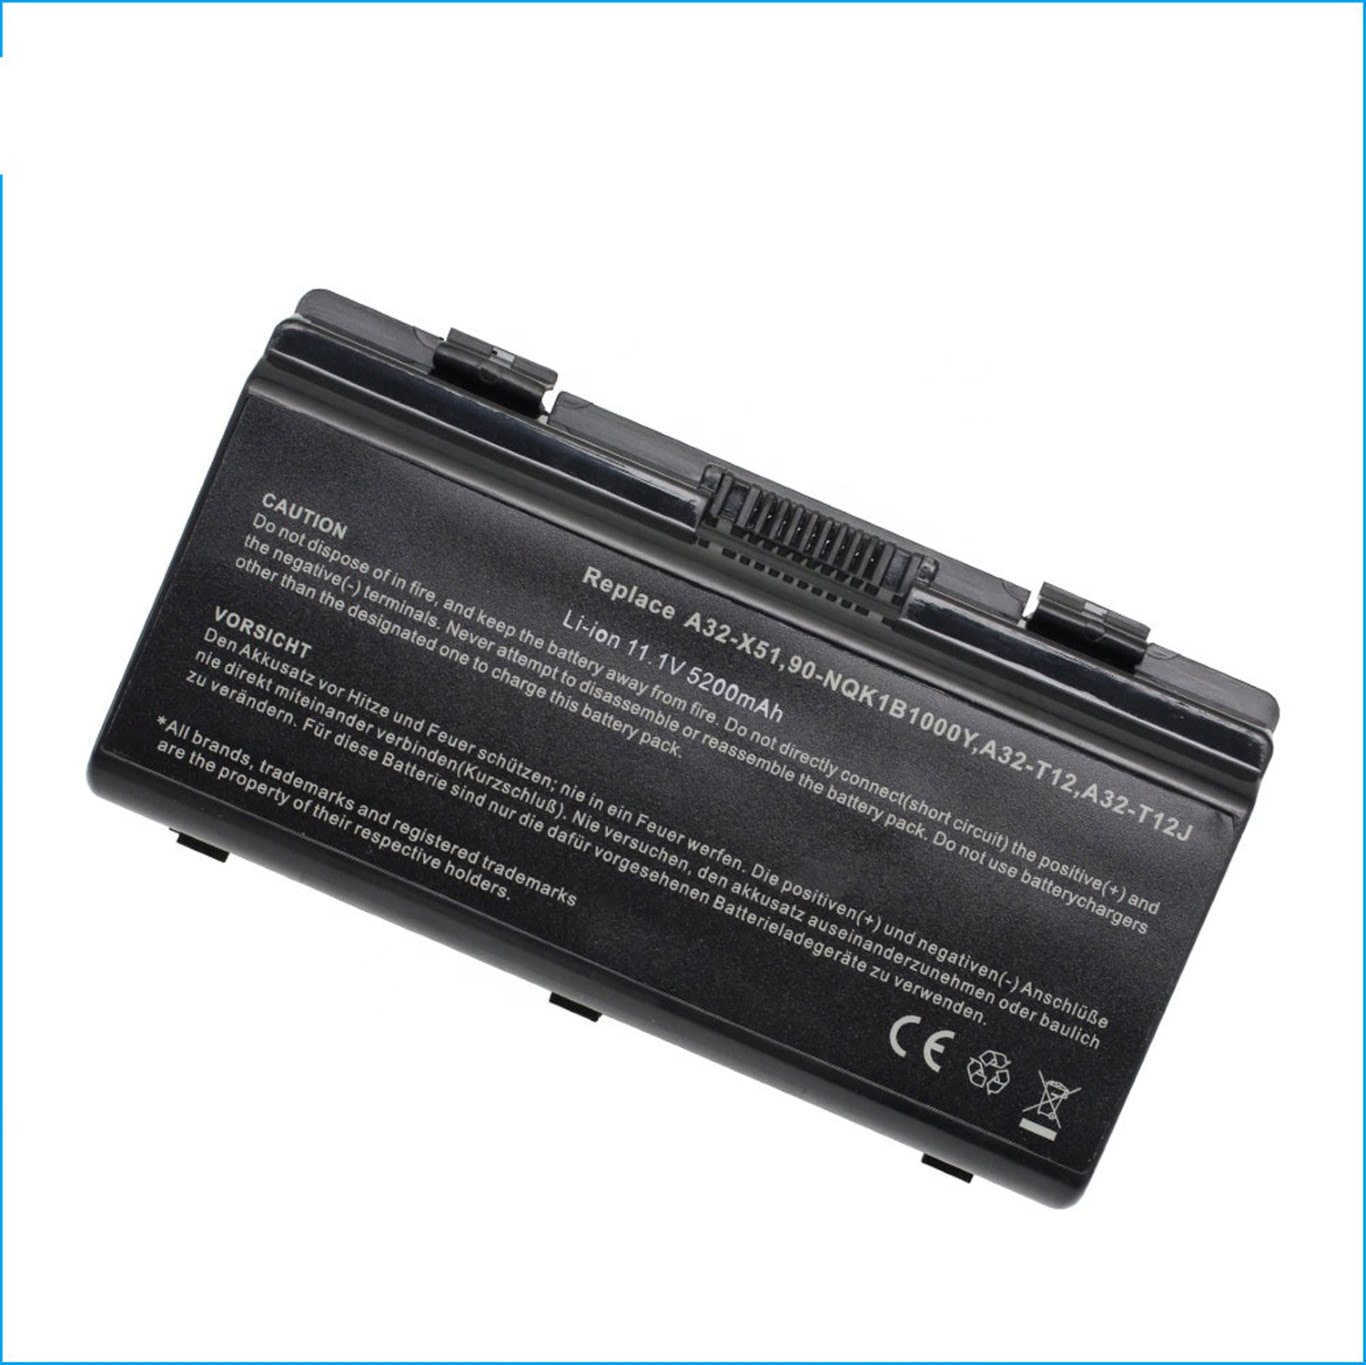 70-NQK1B2000Z, 90-NQK1B1000Y replacement Laptop Battery for Asus Pro52, Pro52H, 6 cells, 11.1V, 4400mAh